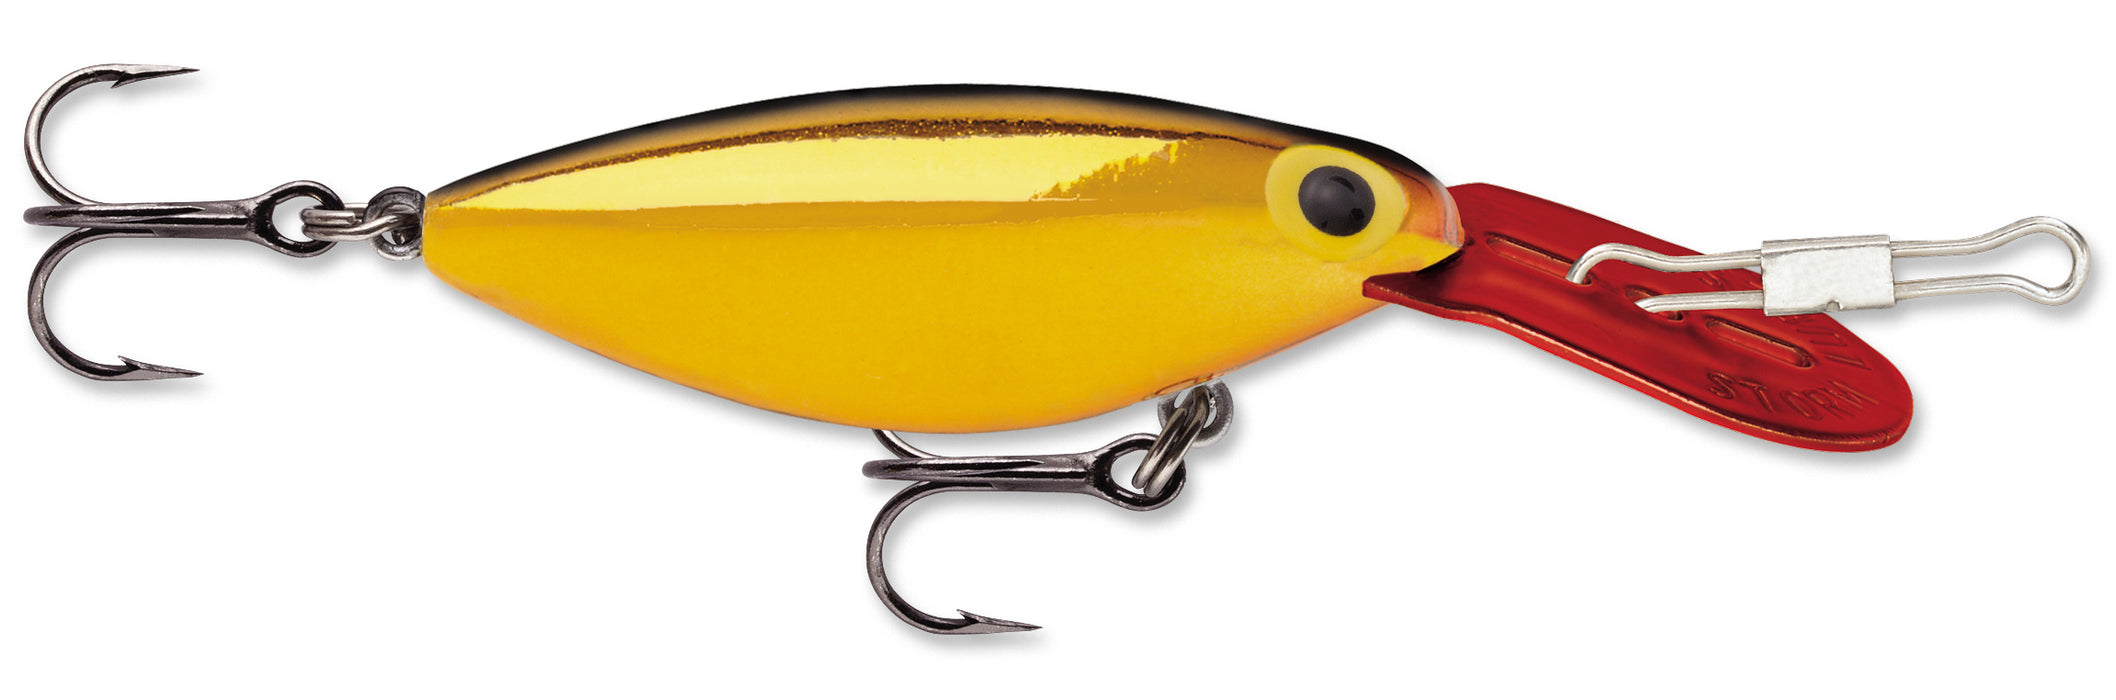 ClearH2O Tackle - Assortment of the Storm Hot'N Tot are in stock